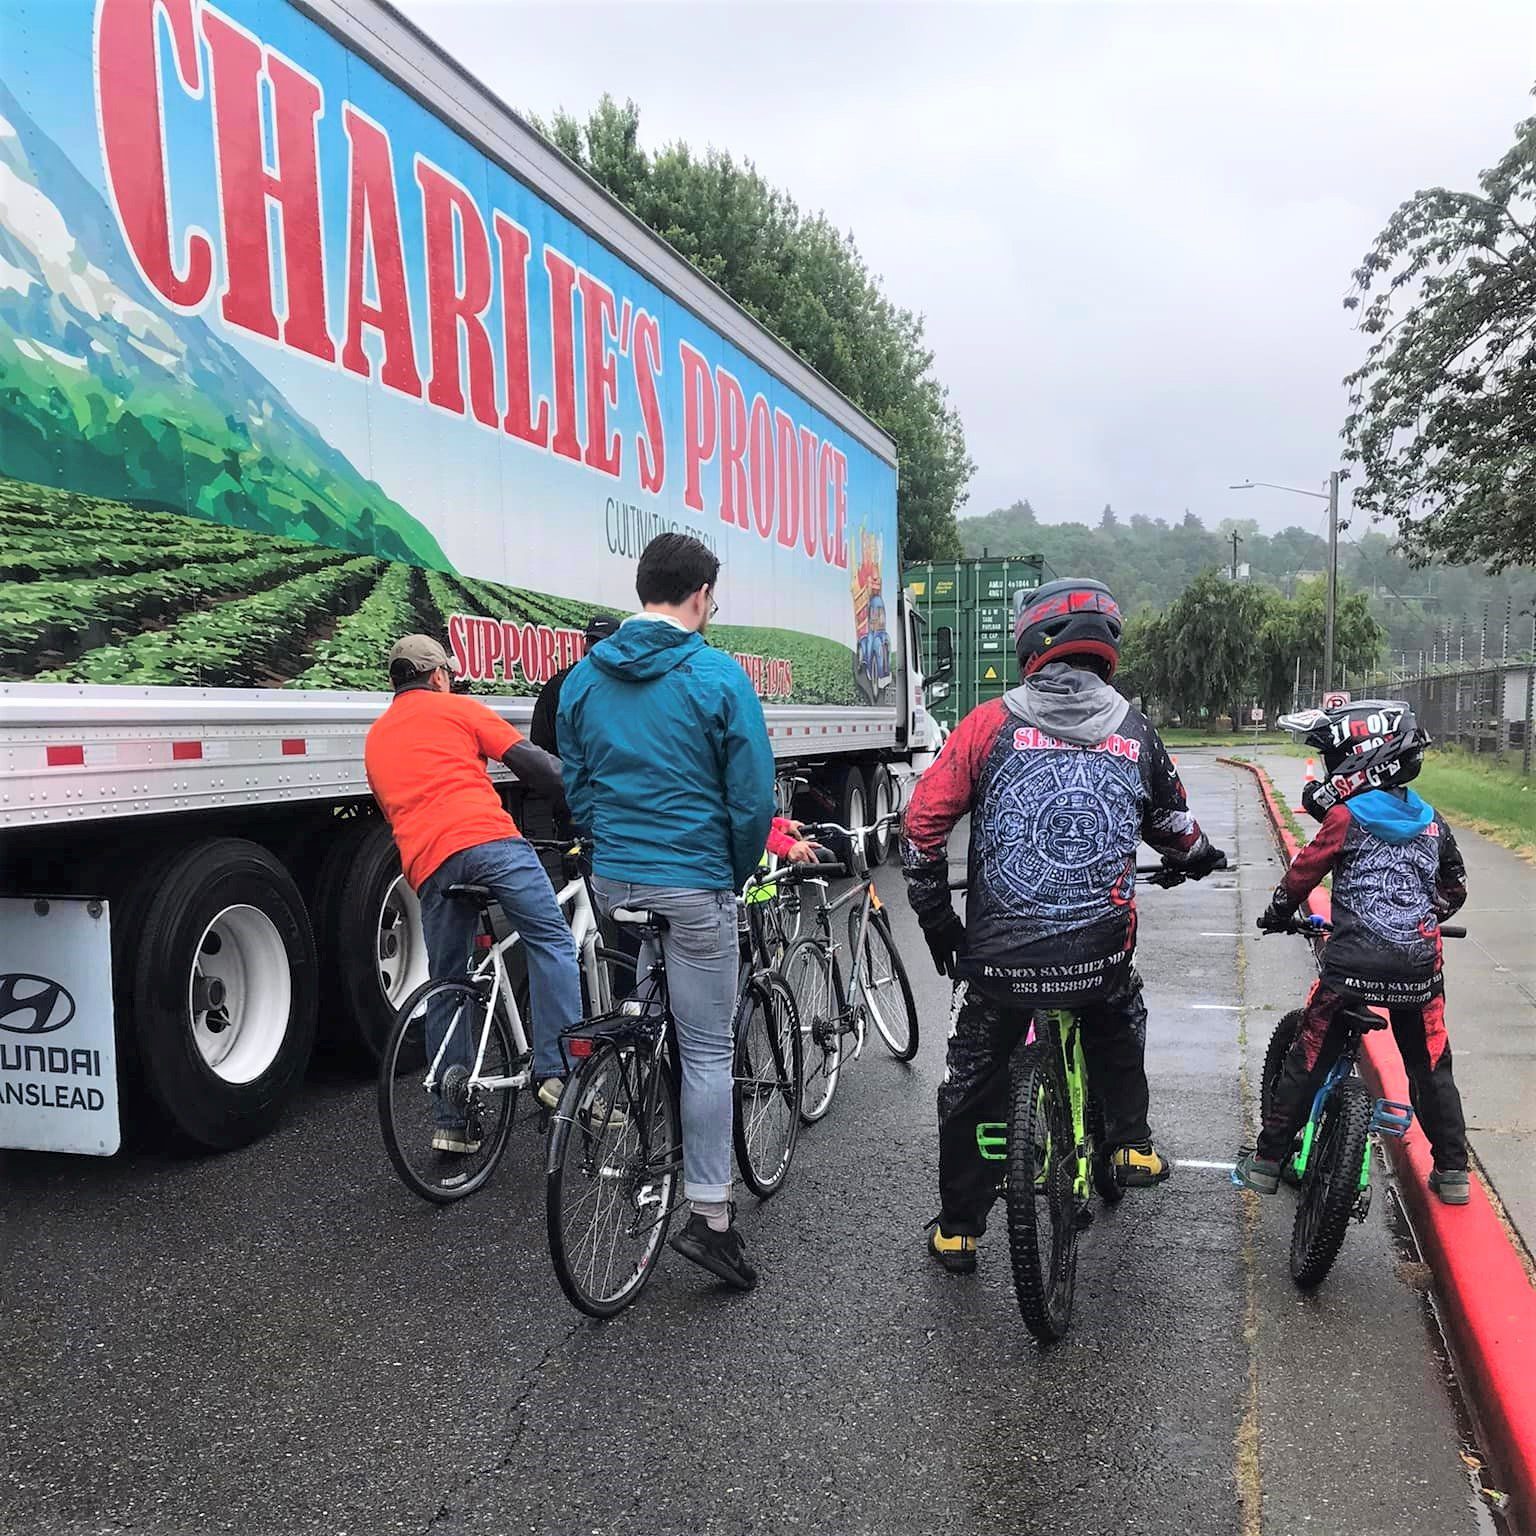 4 adults and one youth sit on bikes on the street between a Charlie's Produce semi truck and the curb. They are discussing the trucks blind spots. 